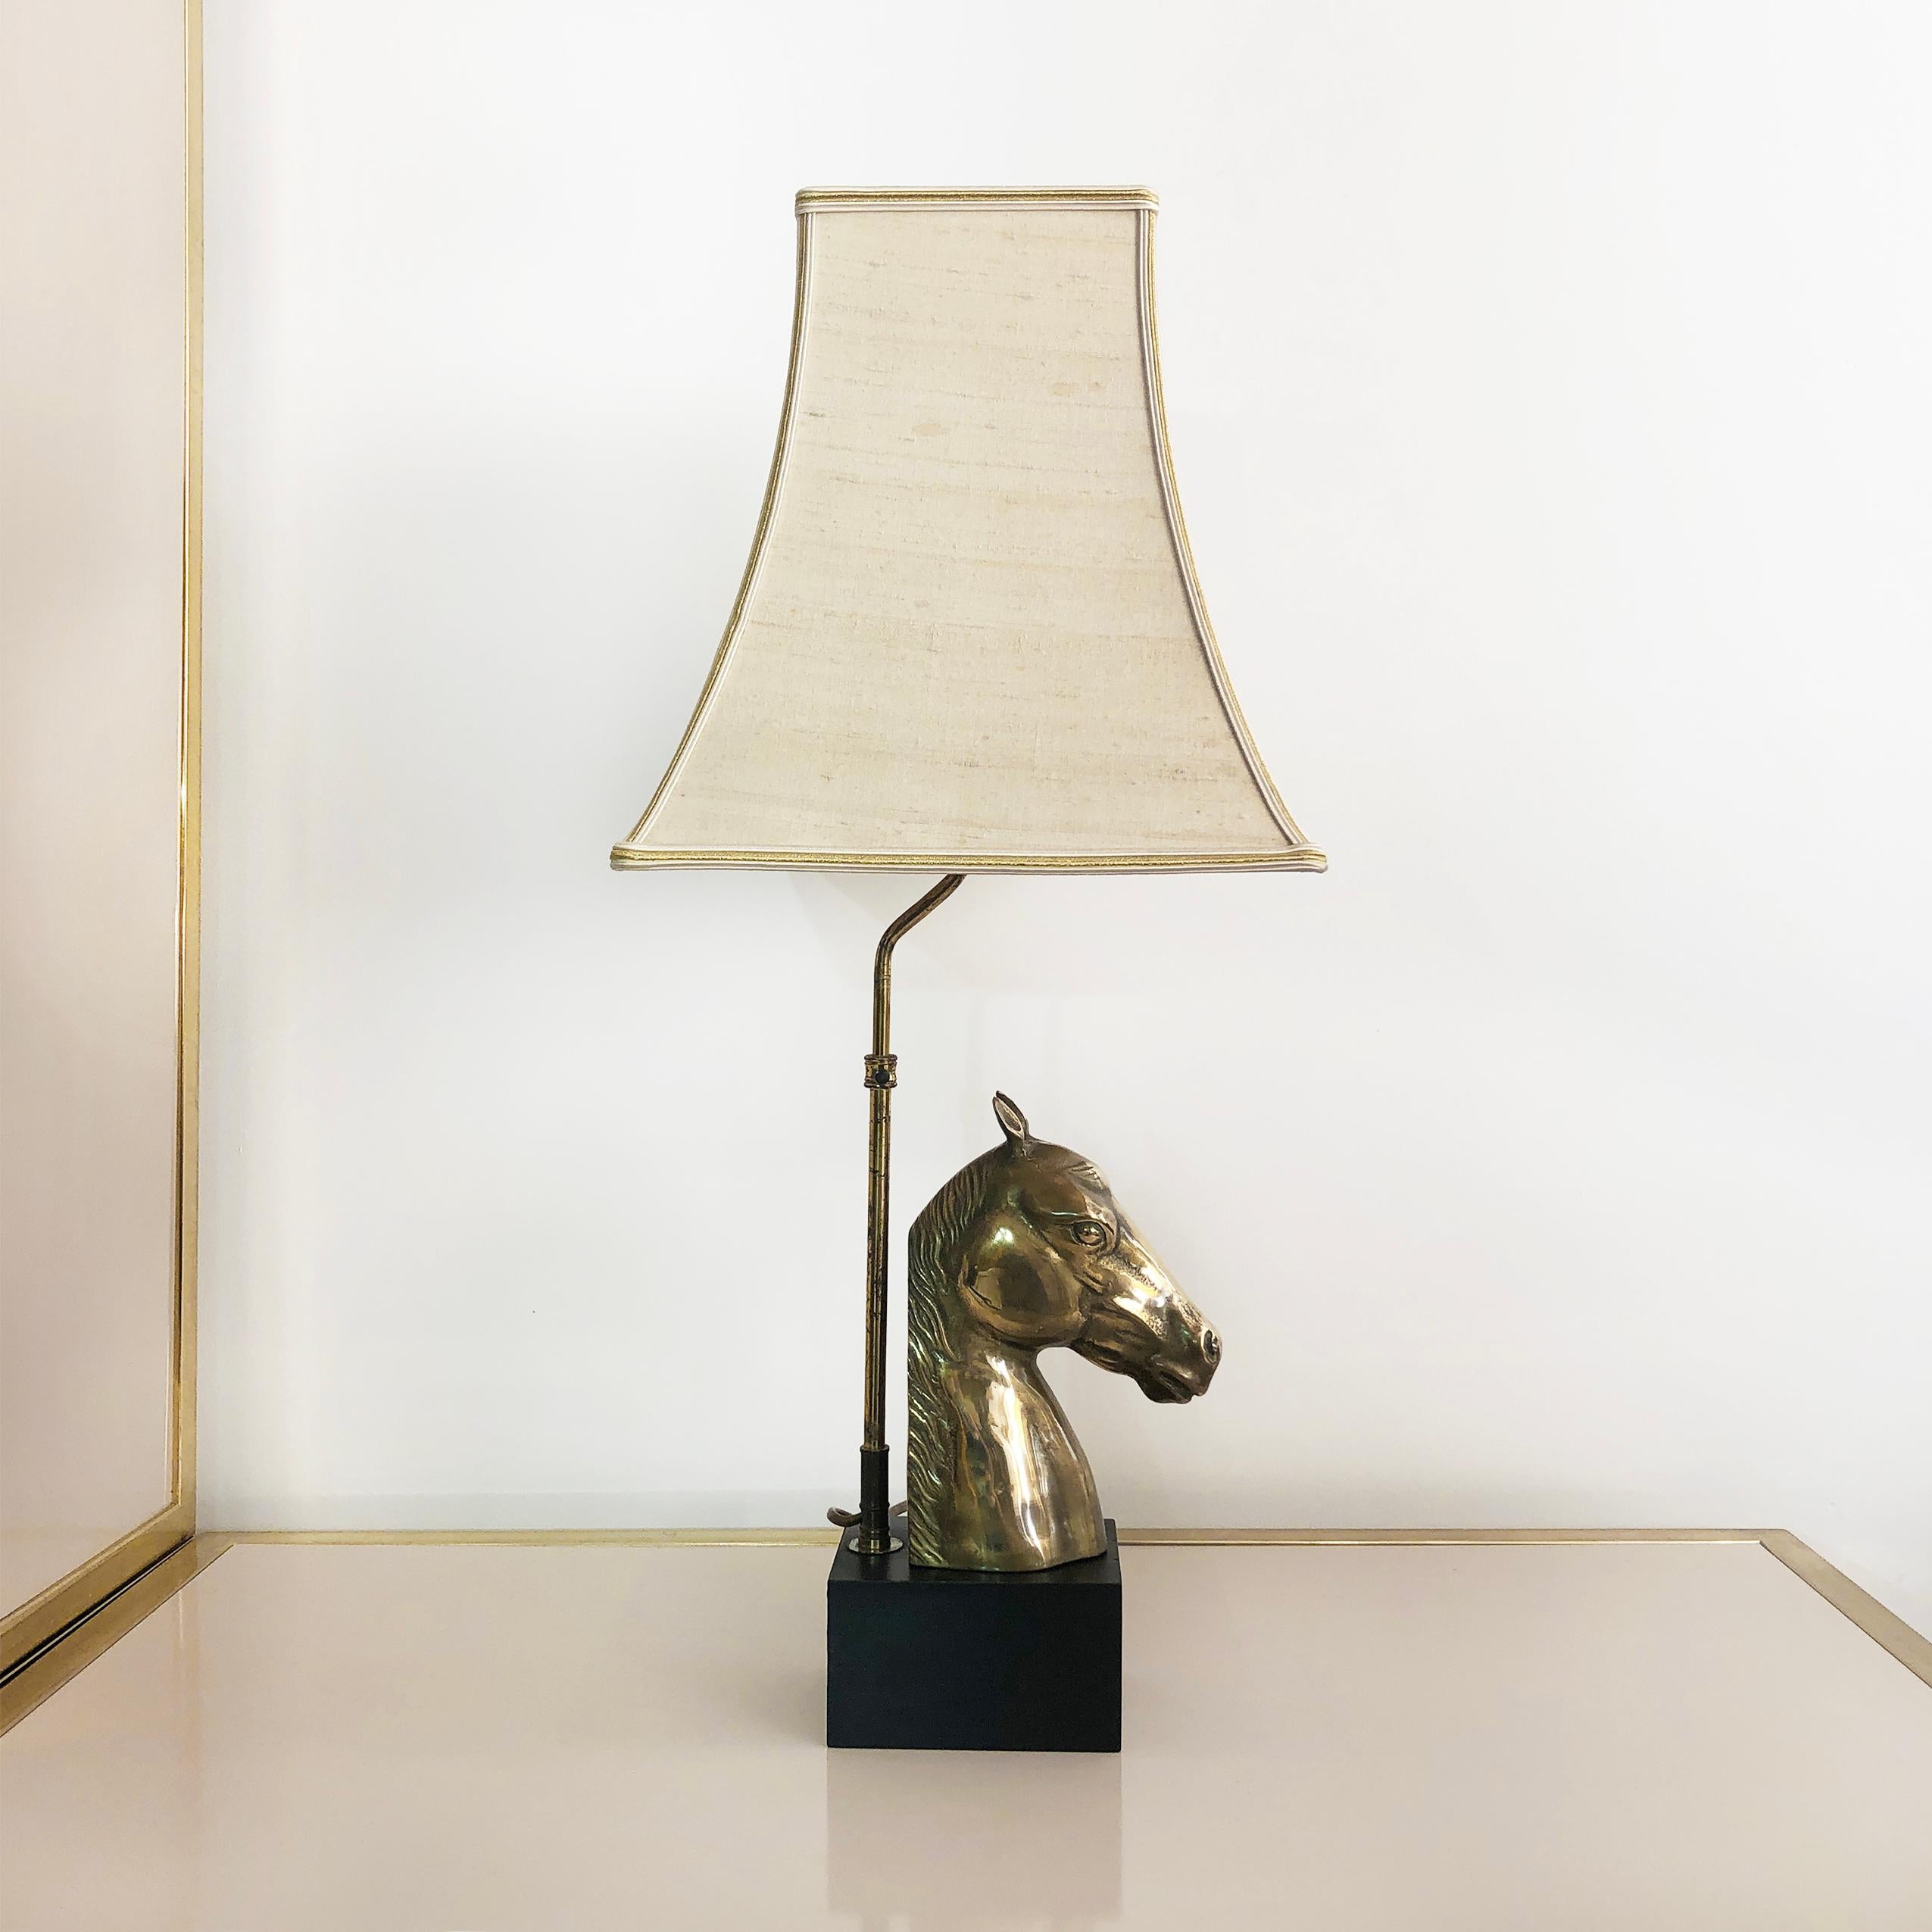 Brass Horse Chinoiserie Table Lamp 1970s Hollywood Regency Midcentury Antique For Sale 2